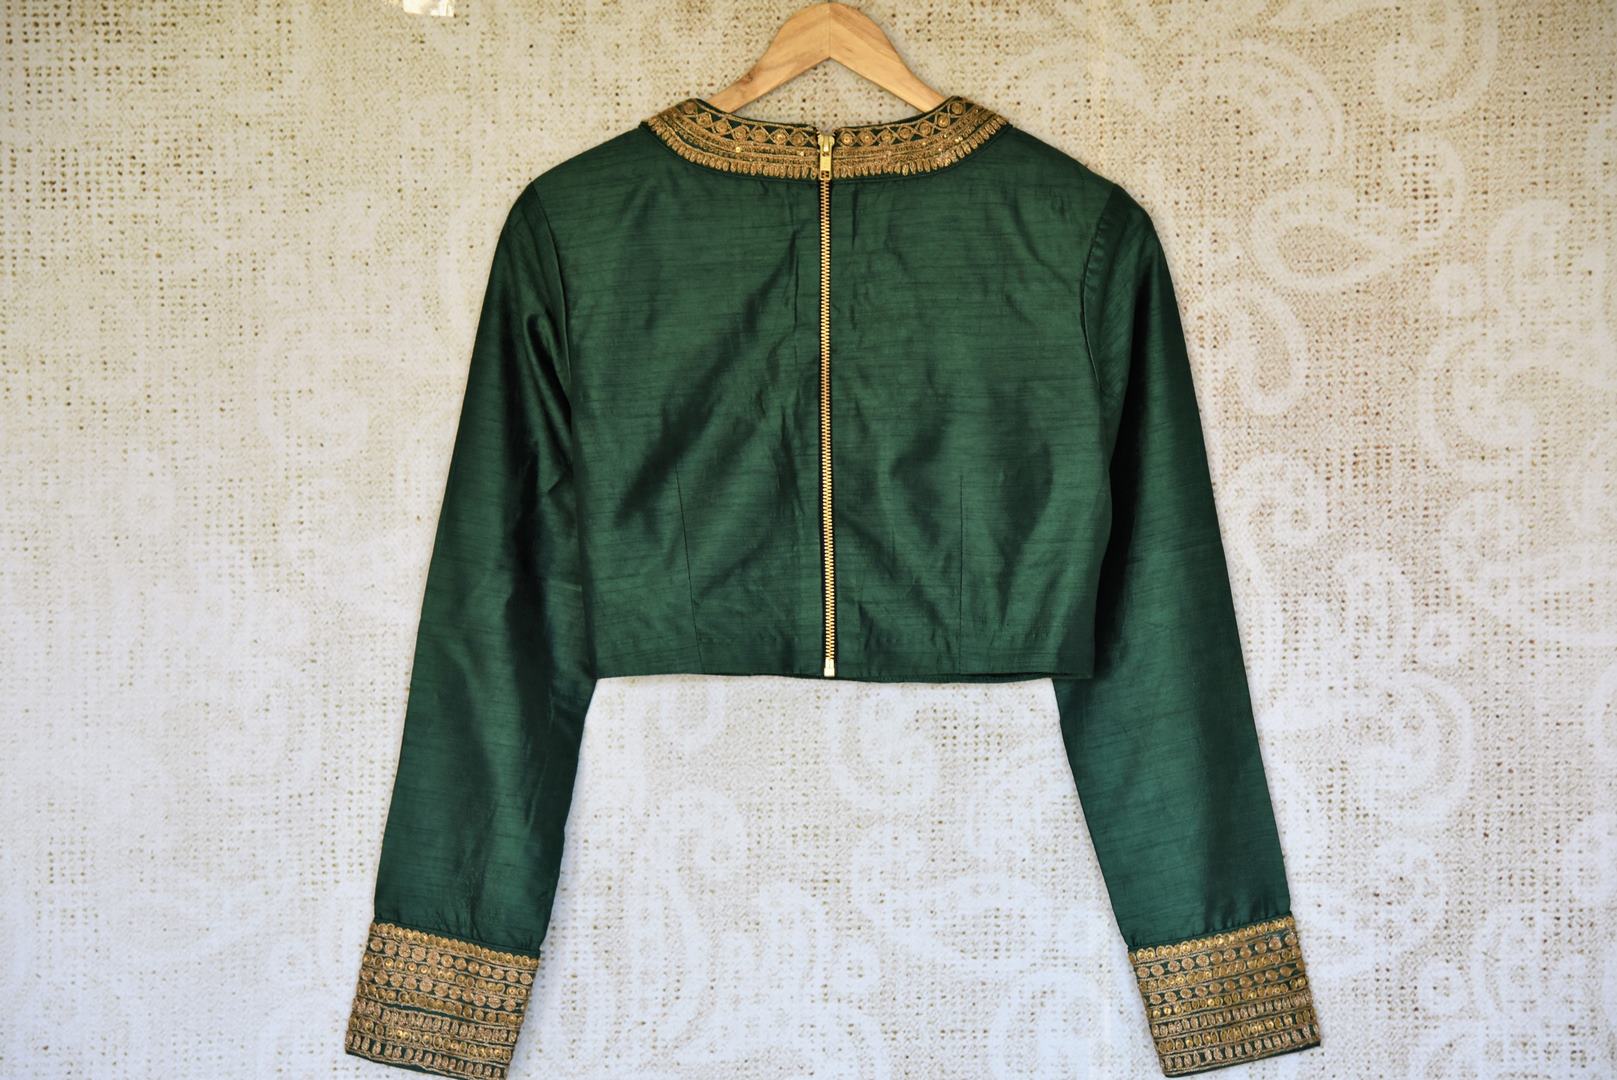 Buy bottle green embroidered silk designer sari blouse with full sleeves online in USA. Complete your saree look with exquisite designer sari blouses from Pure Elegance Indian clothing store in USA. -back